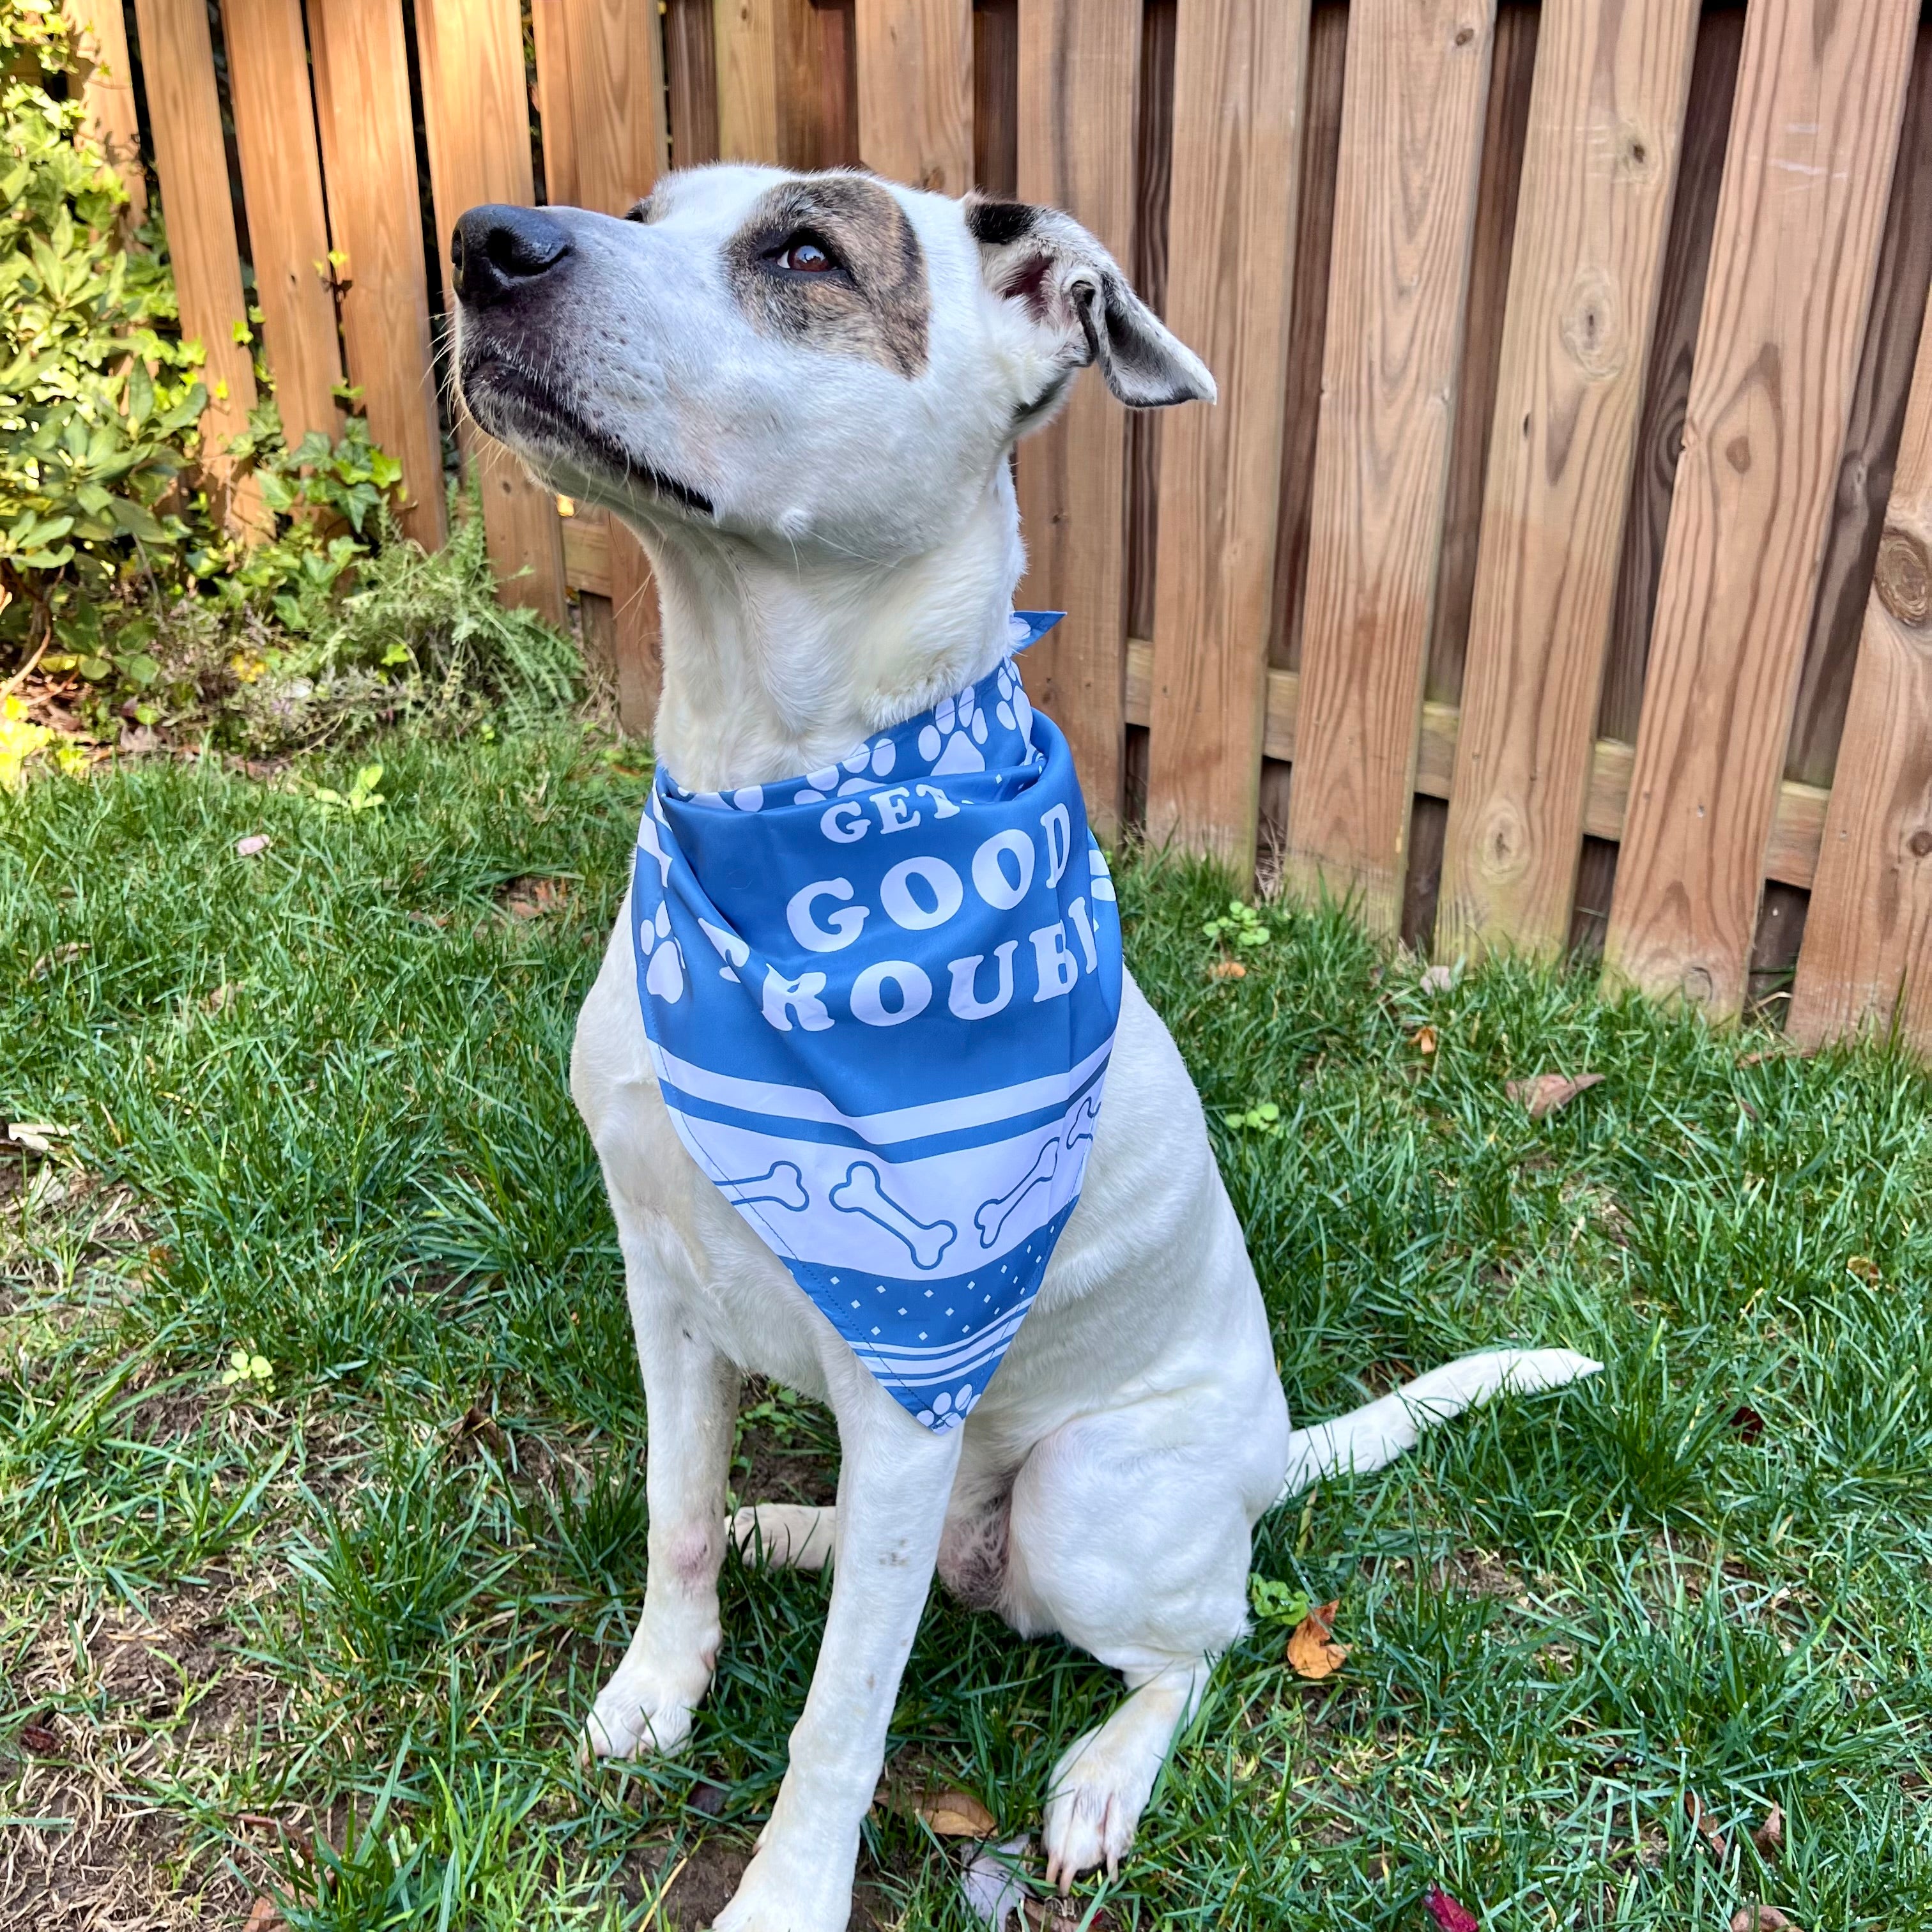 White dog wears a blue bandanna with "Get In Good Trouble" Design with Bones and Pawprints